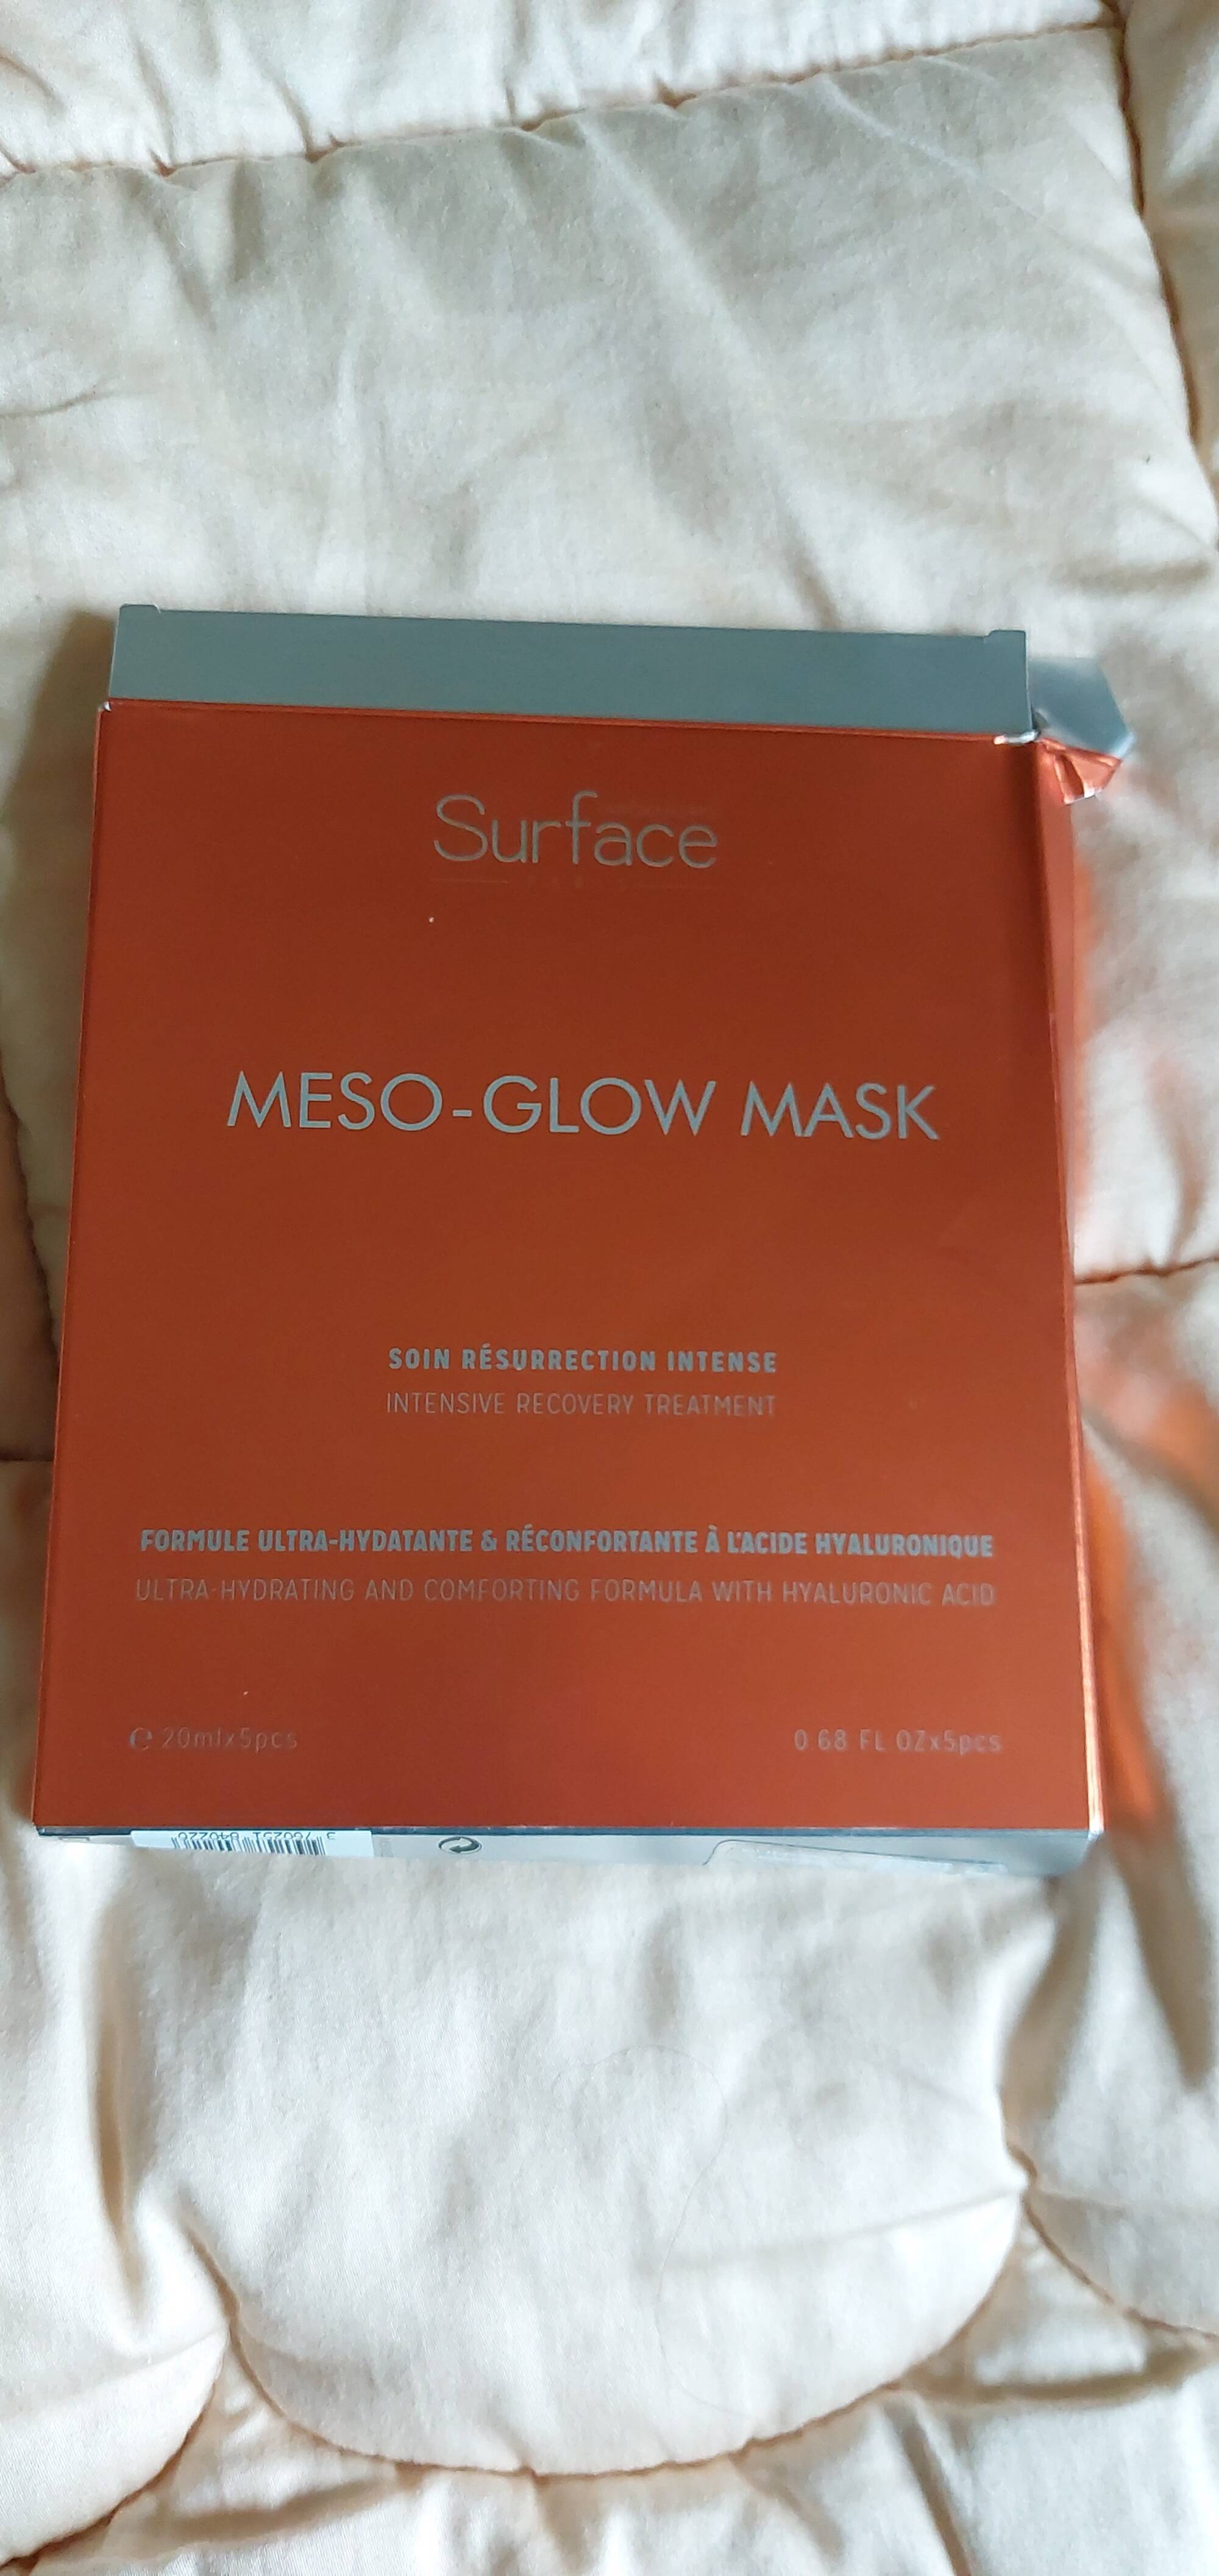 SURFACE - Meso-glow mask